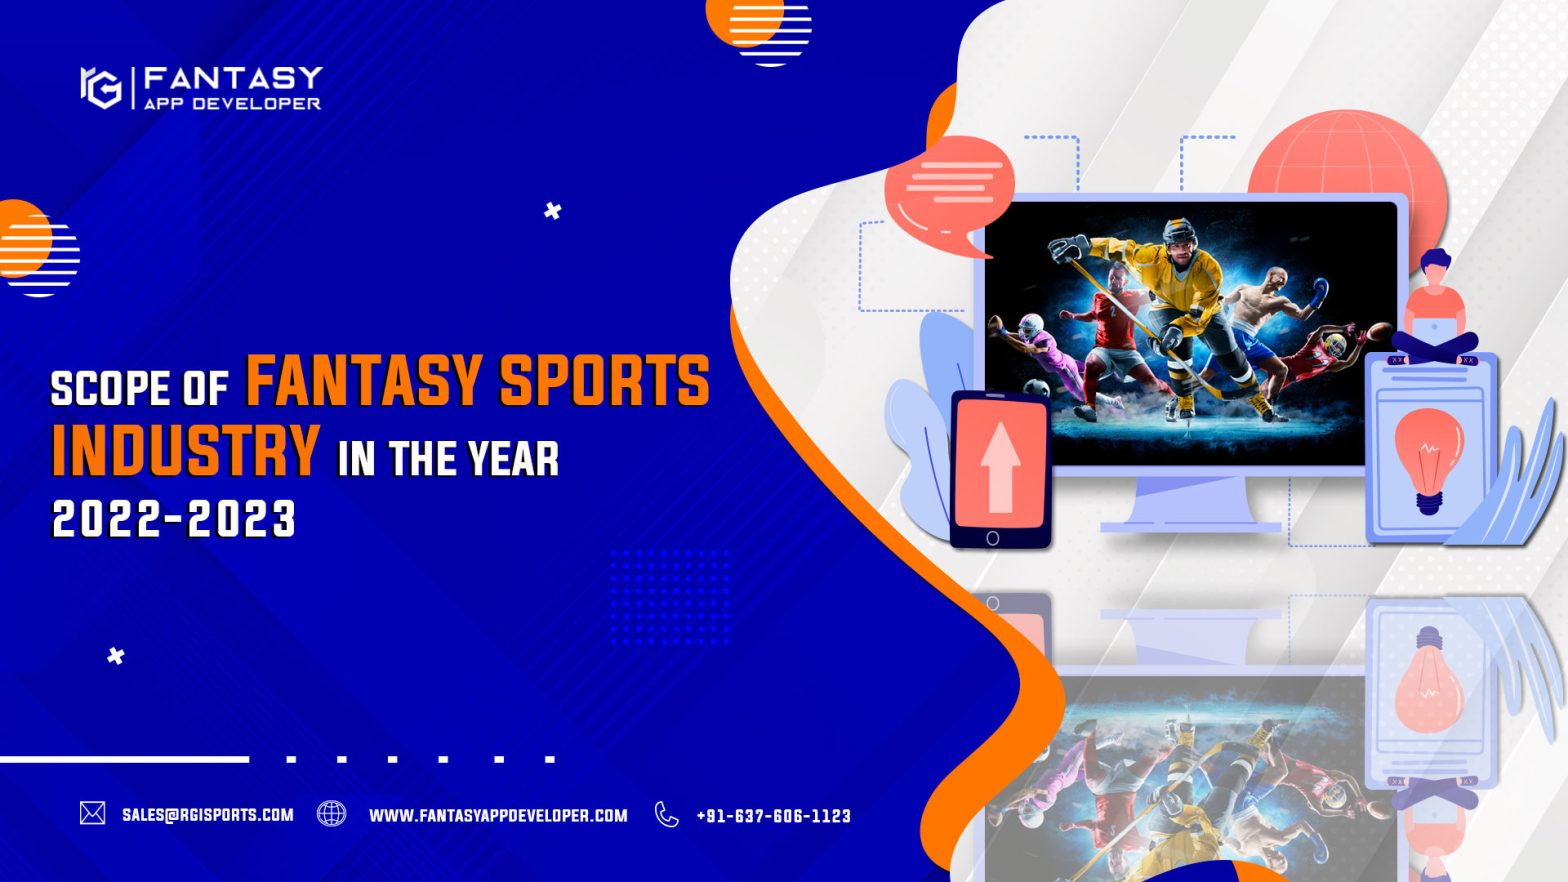 Scope of Fantasy Sports Industry in the Year 2022-2023